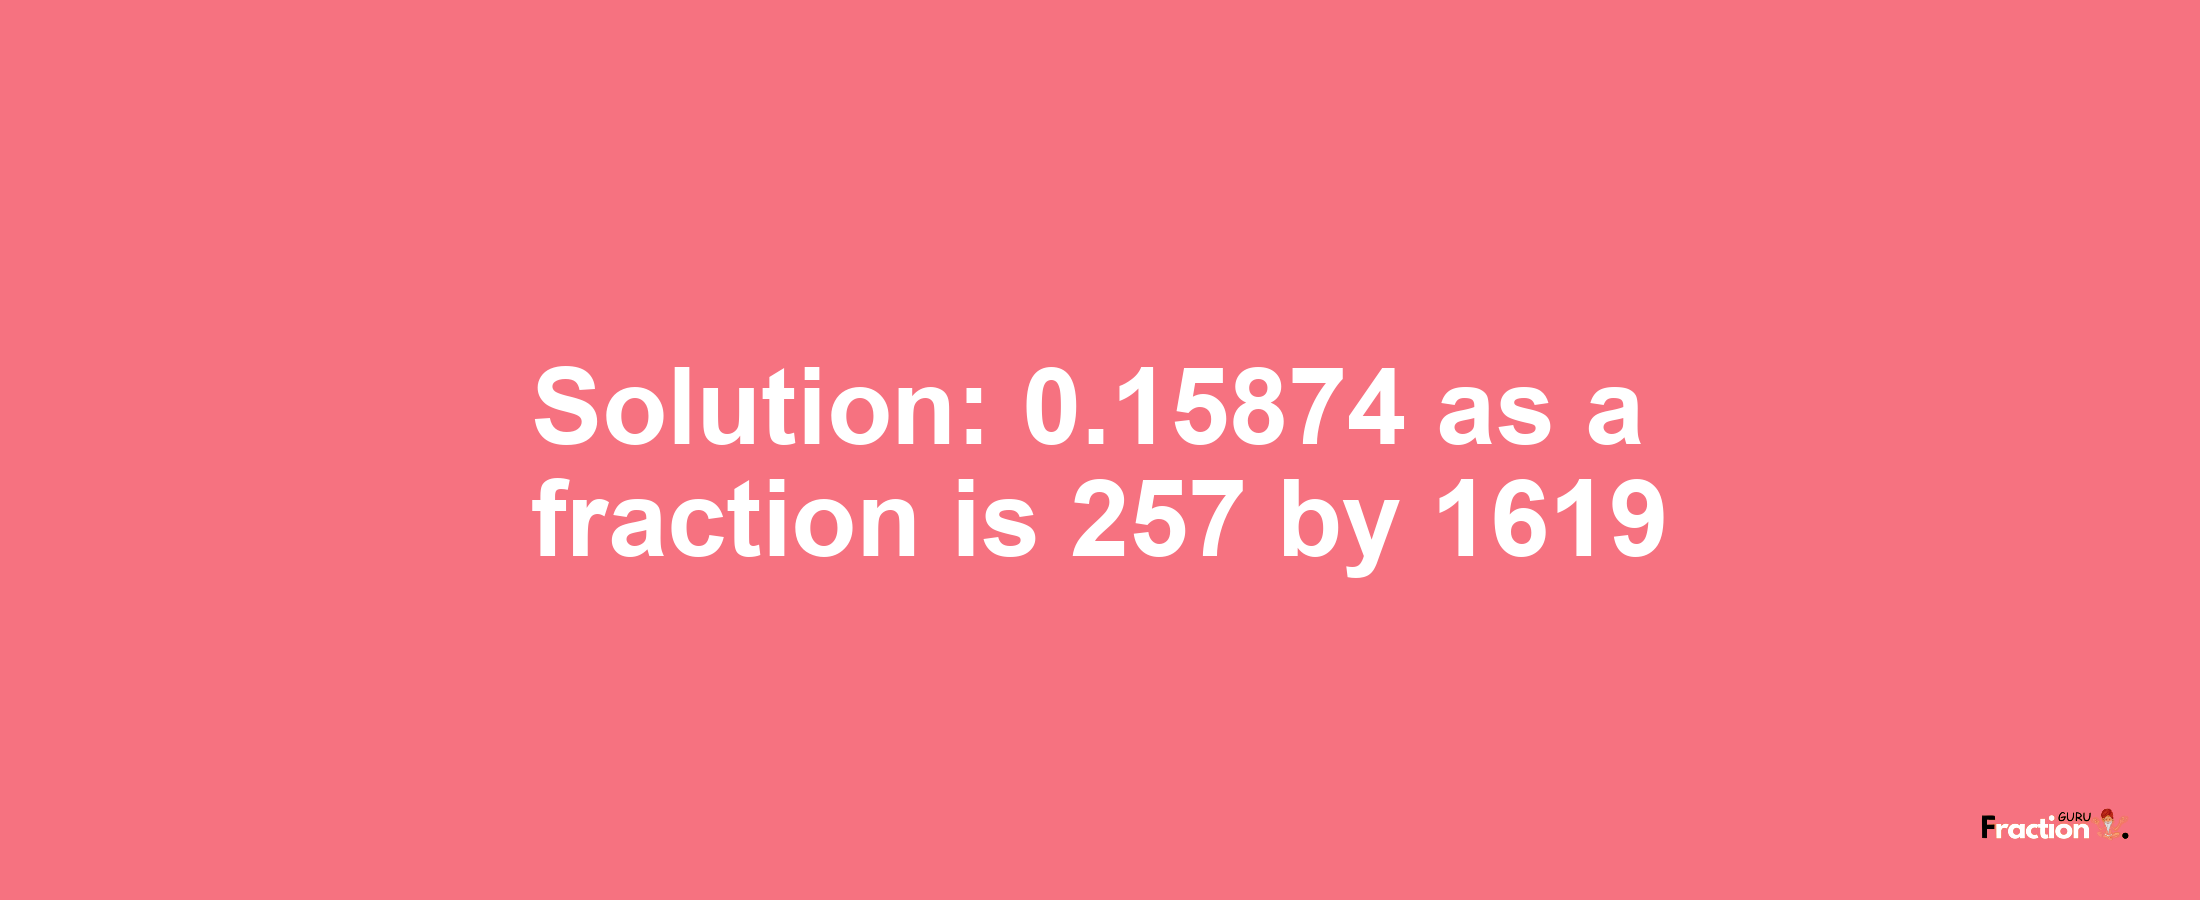 Solution:0.15874 as a fraction is 257/1619